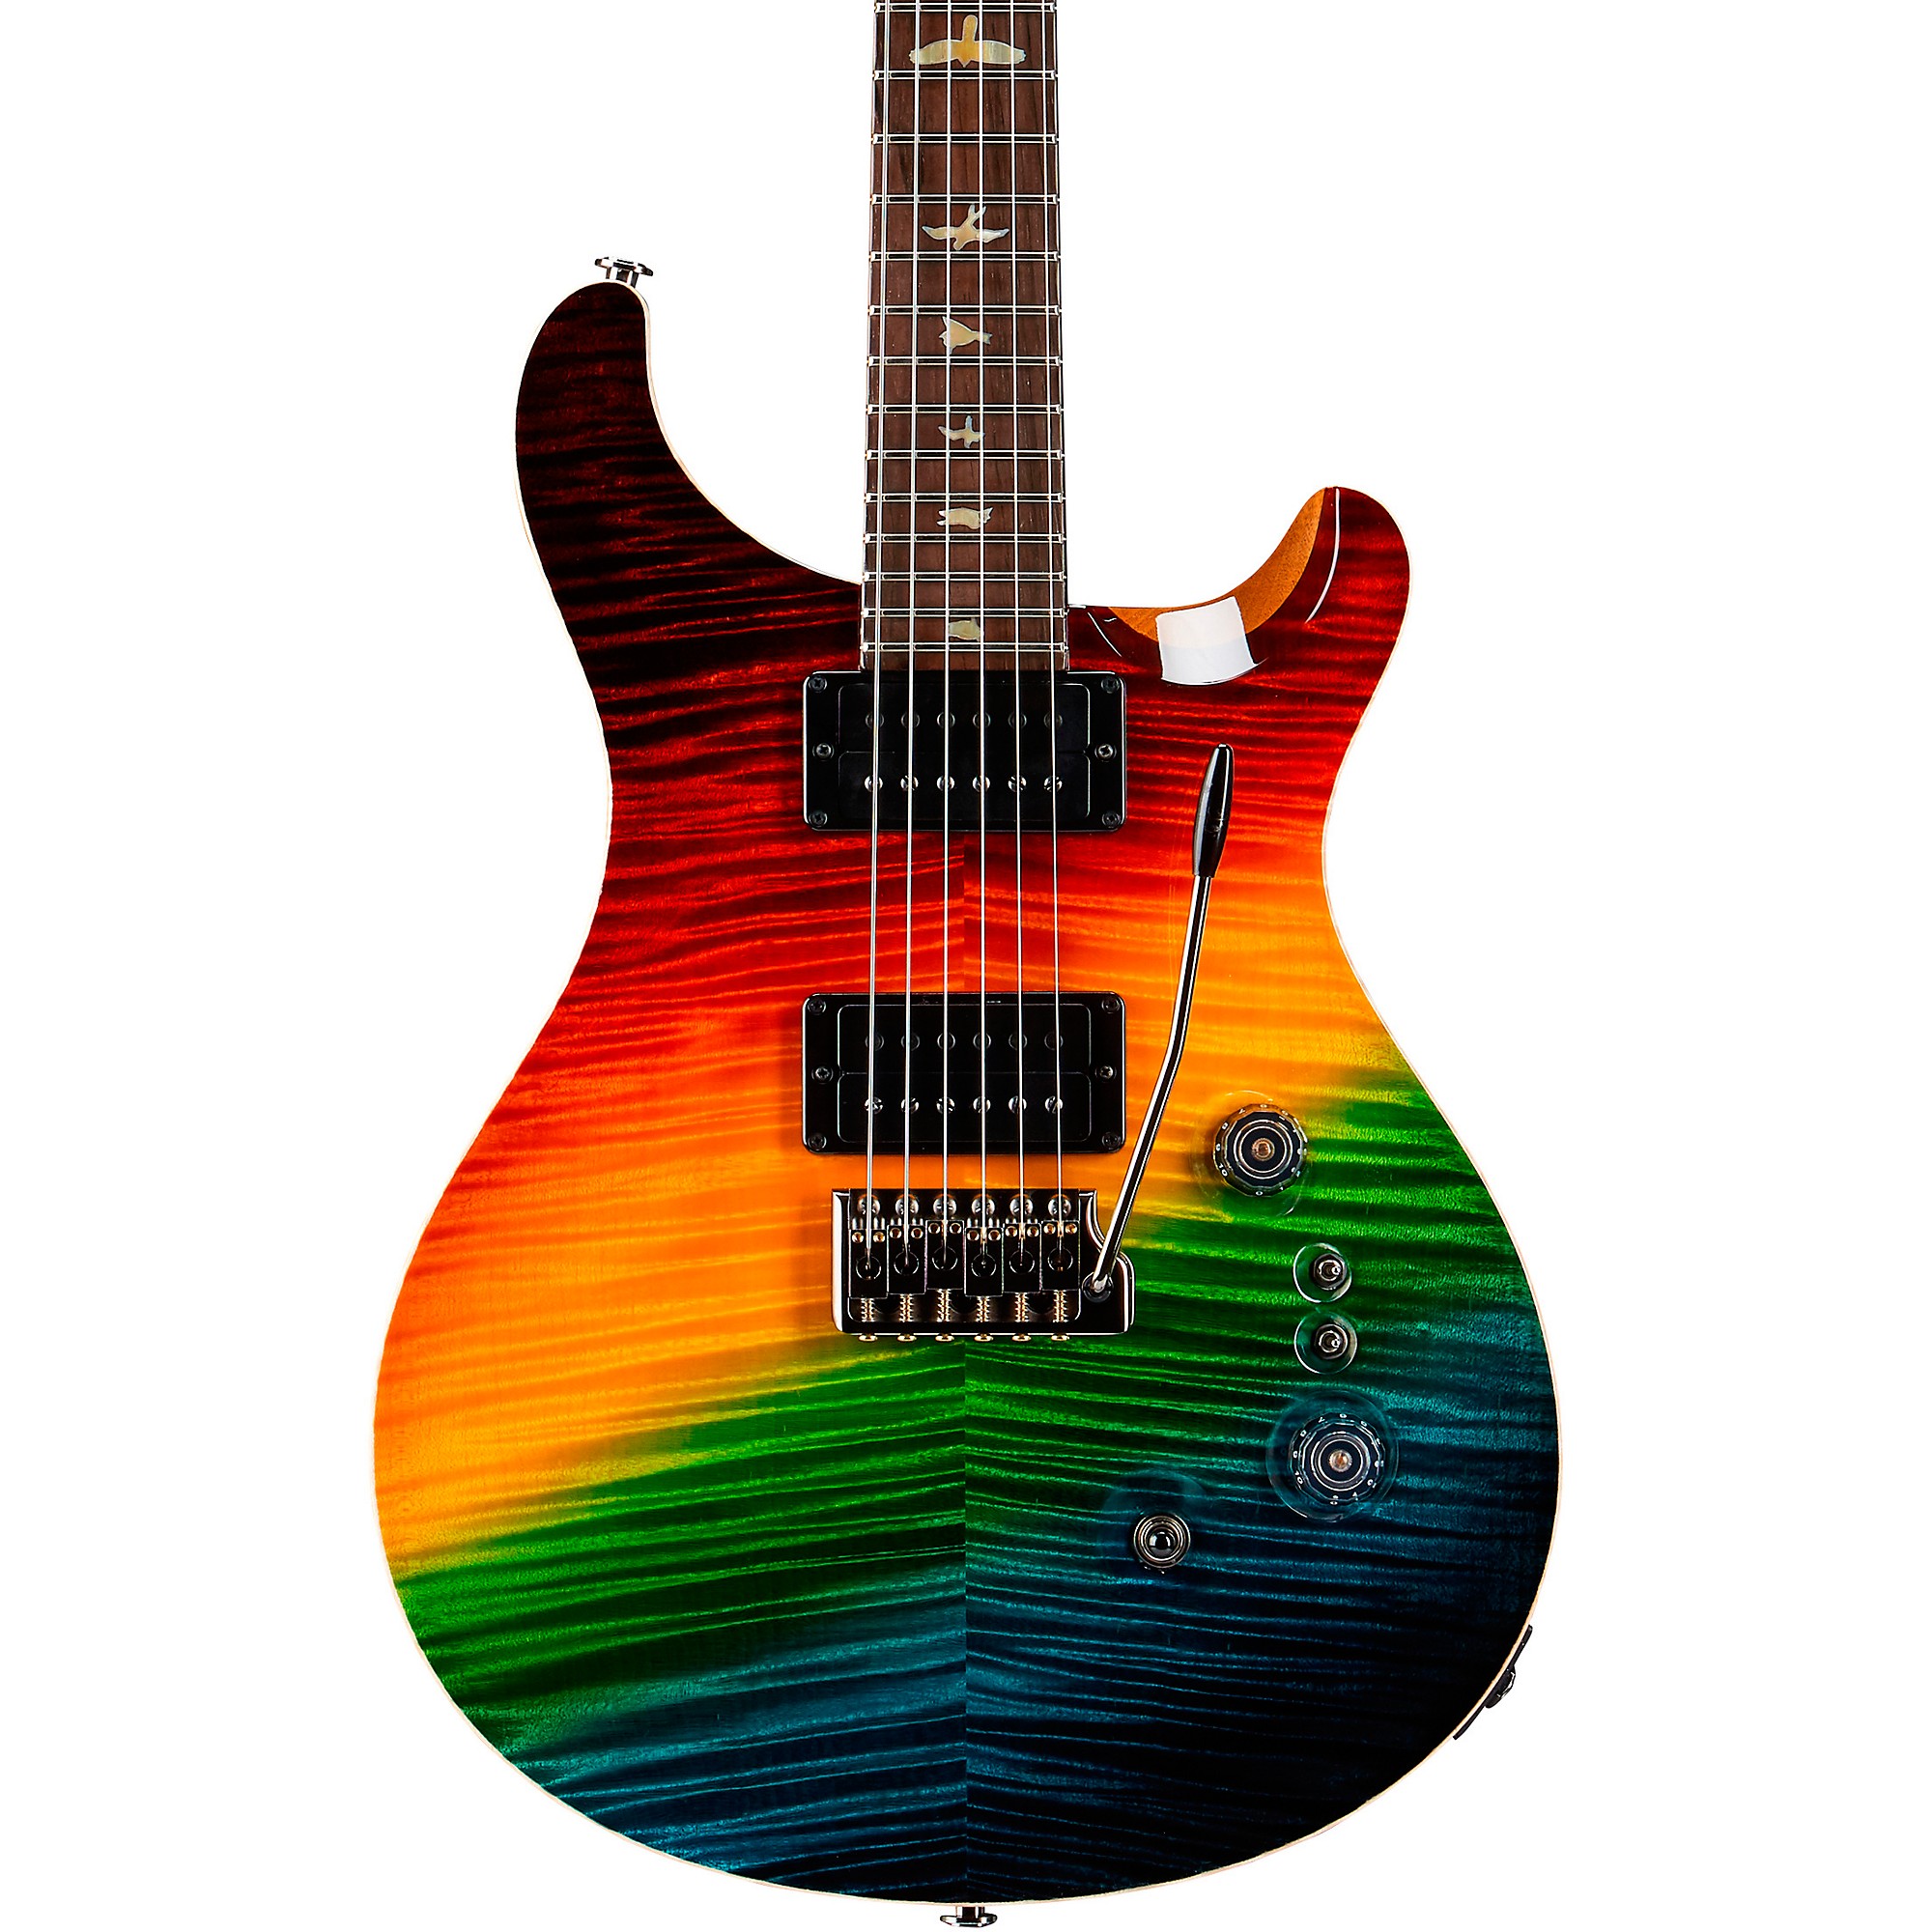 PRS Private Stock Custom 24-08 With Curly Maple Top, Figured Mahogany Back  and Neck, Brazilian Rosewood Fretboard, Pattern Regular Neck Shape Electric  